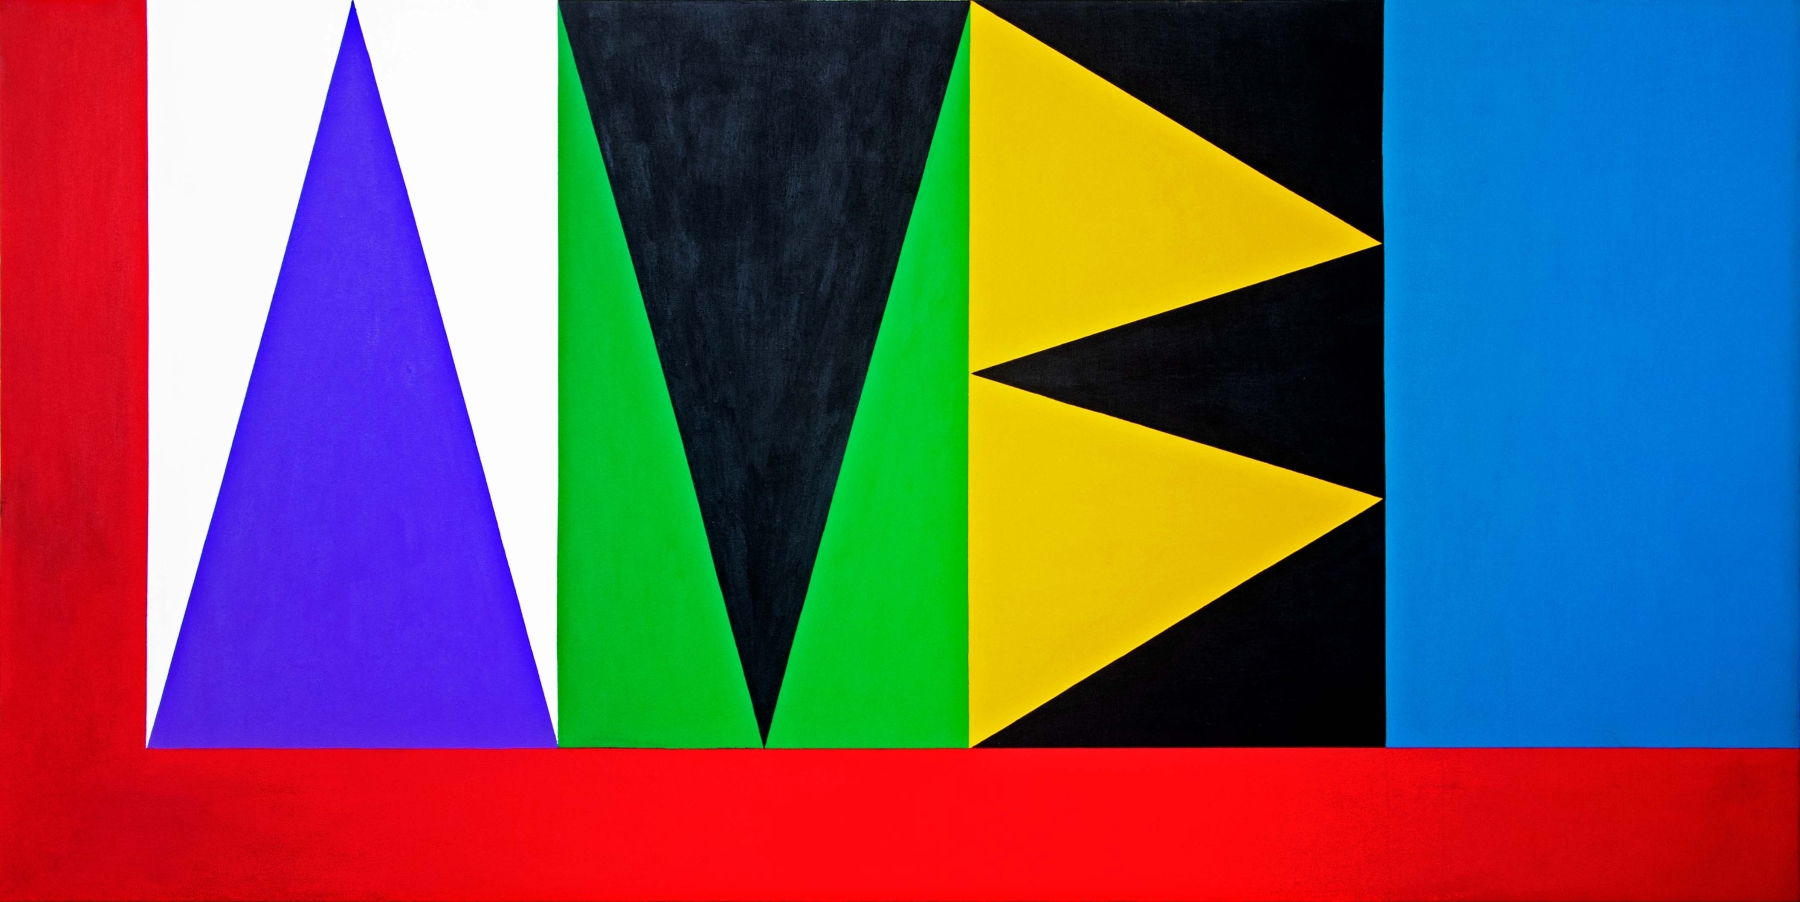 Ron Burkhardt, LetterScapes "LAMBO." 2020. Acrylic on Canvas. 24 x 48 inches